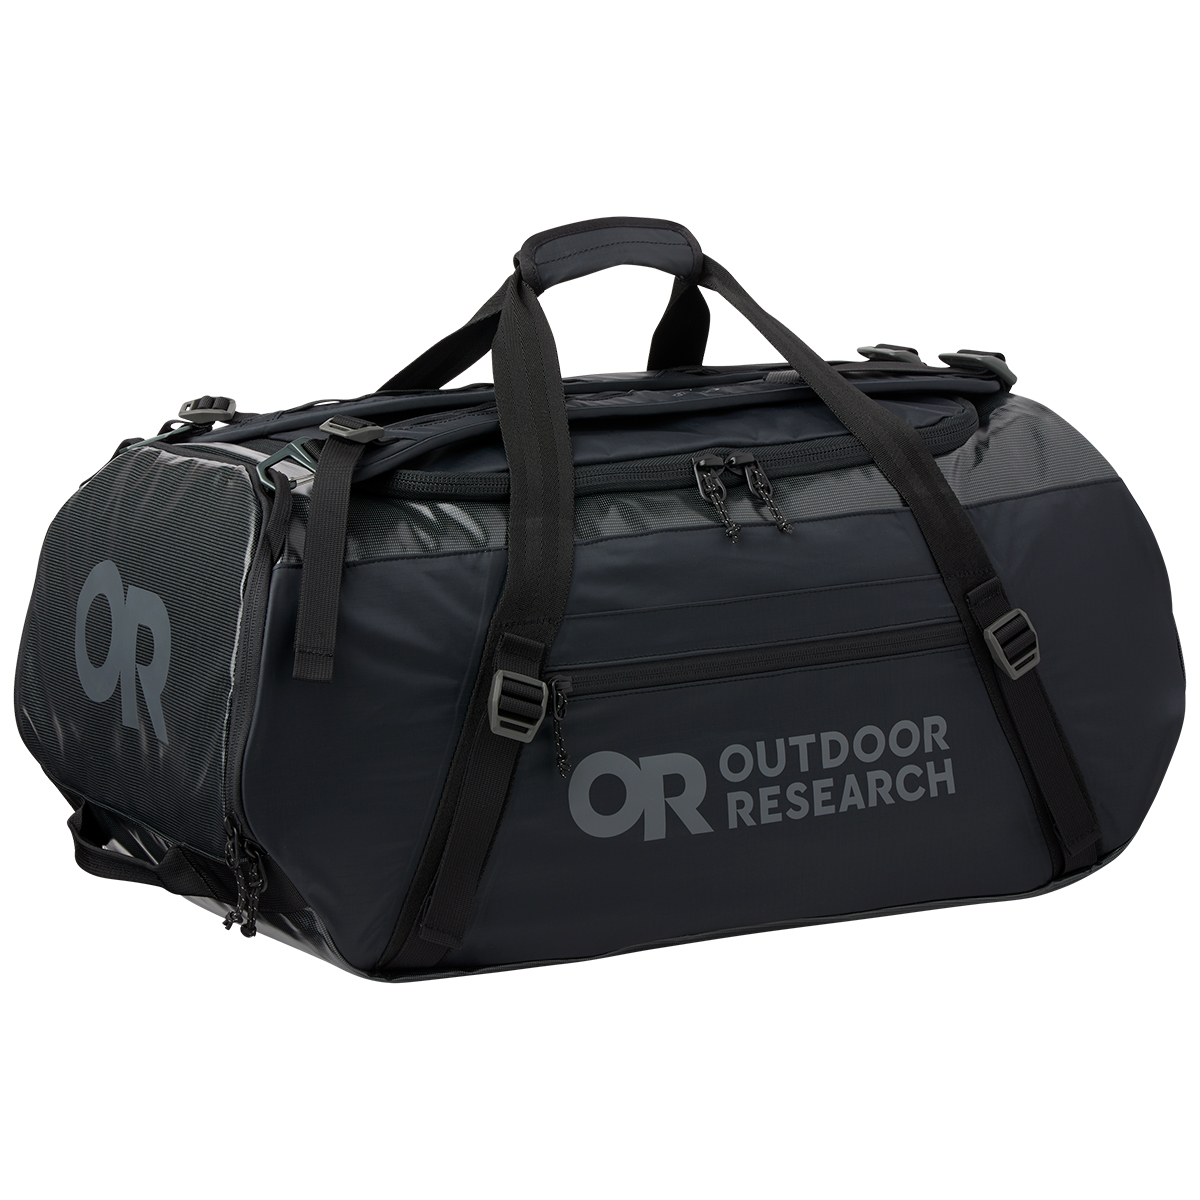 Outdoor Research Carryout Duffel 60L